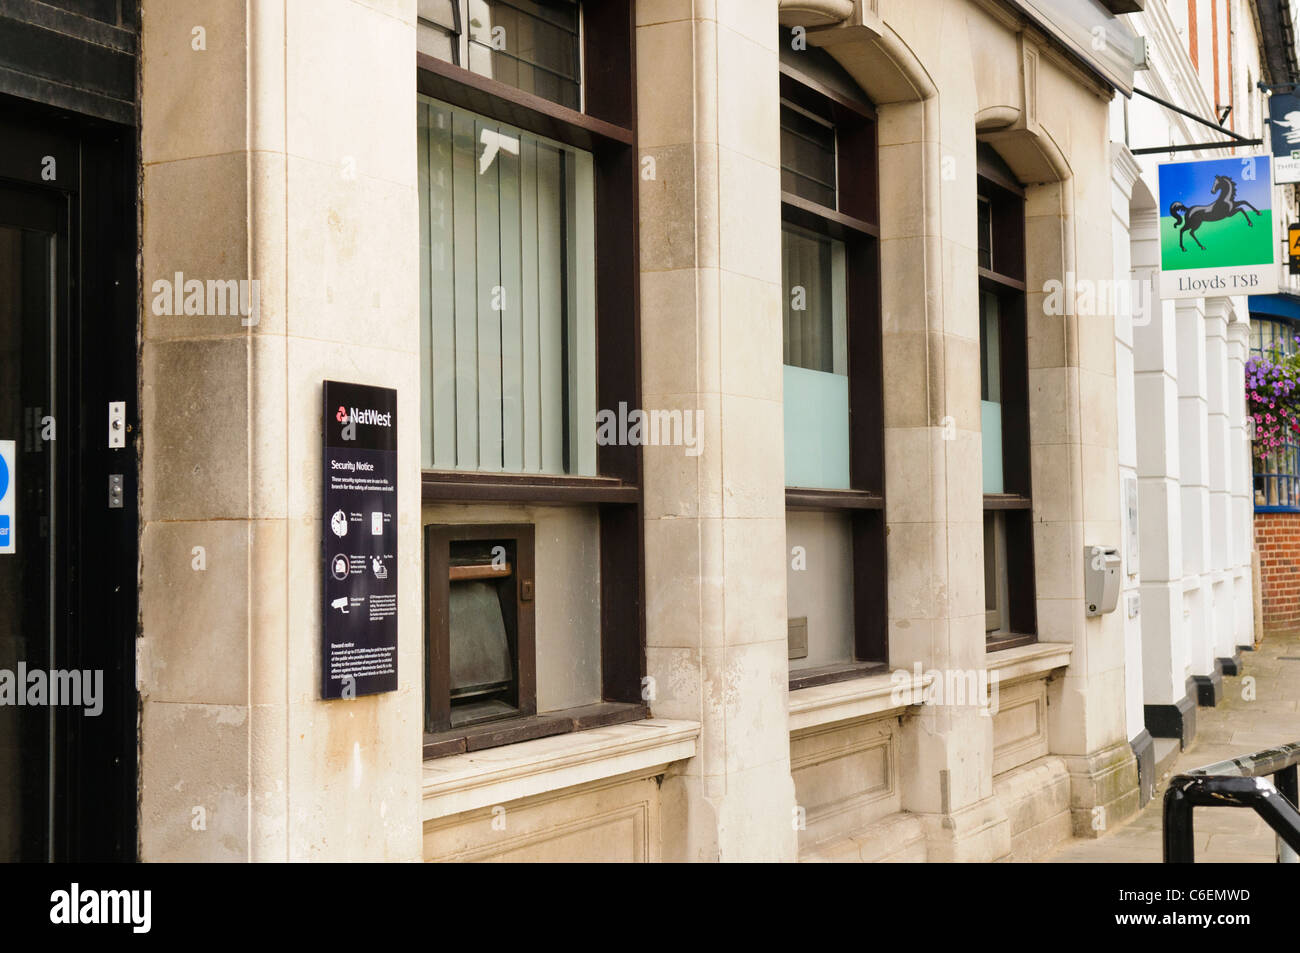 Nat West and Lloyds TSB banks side-by-side on a High Street Stock Photo